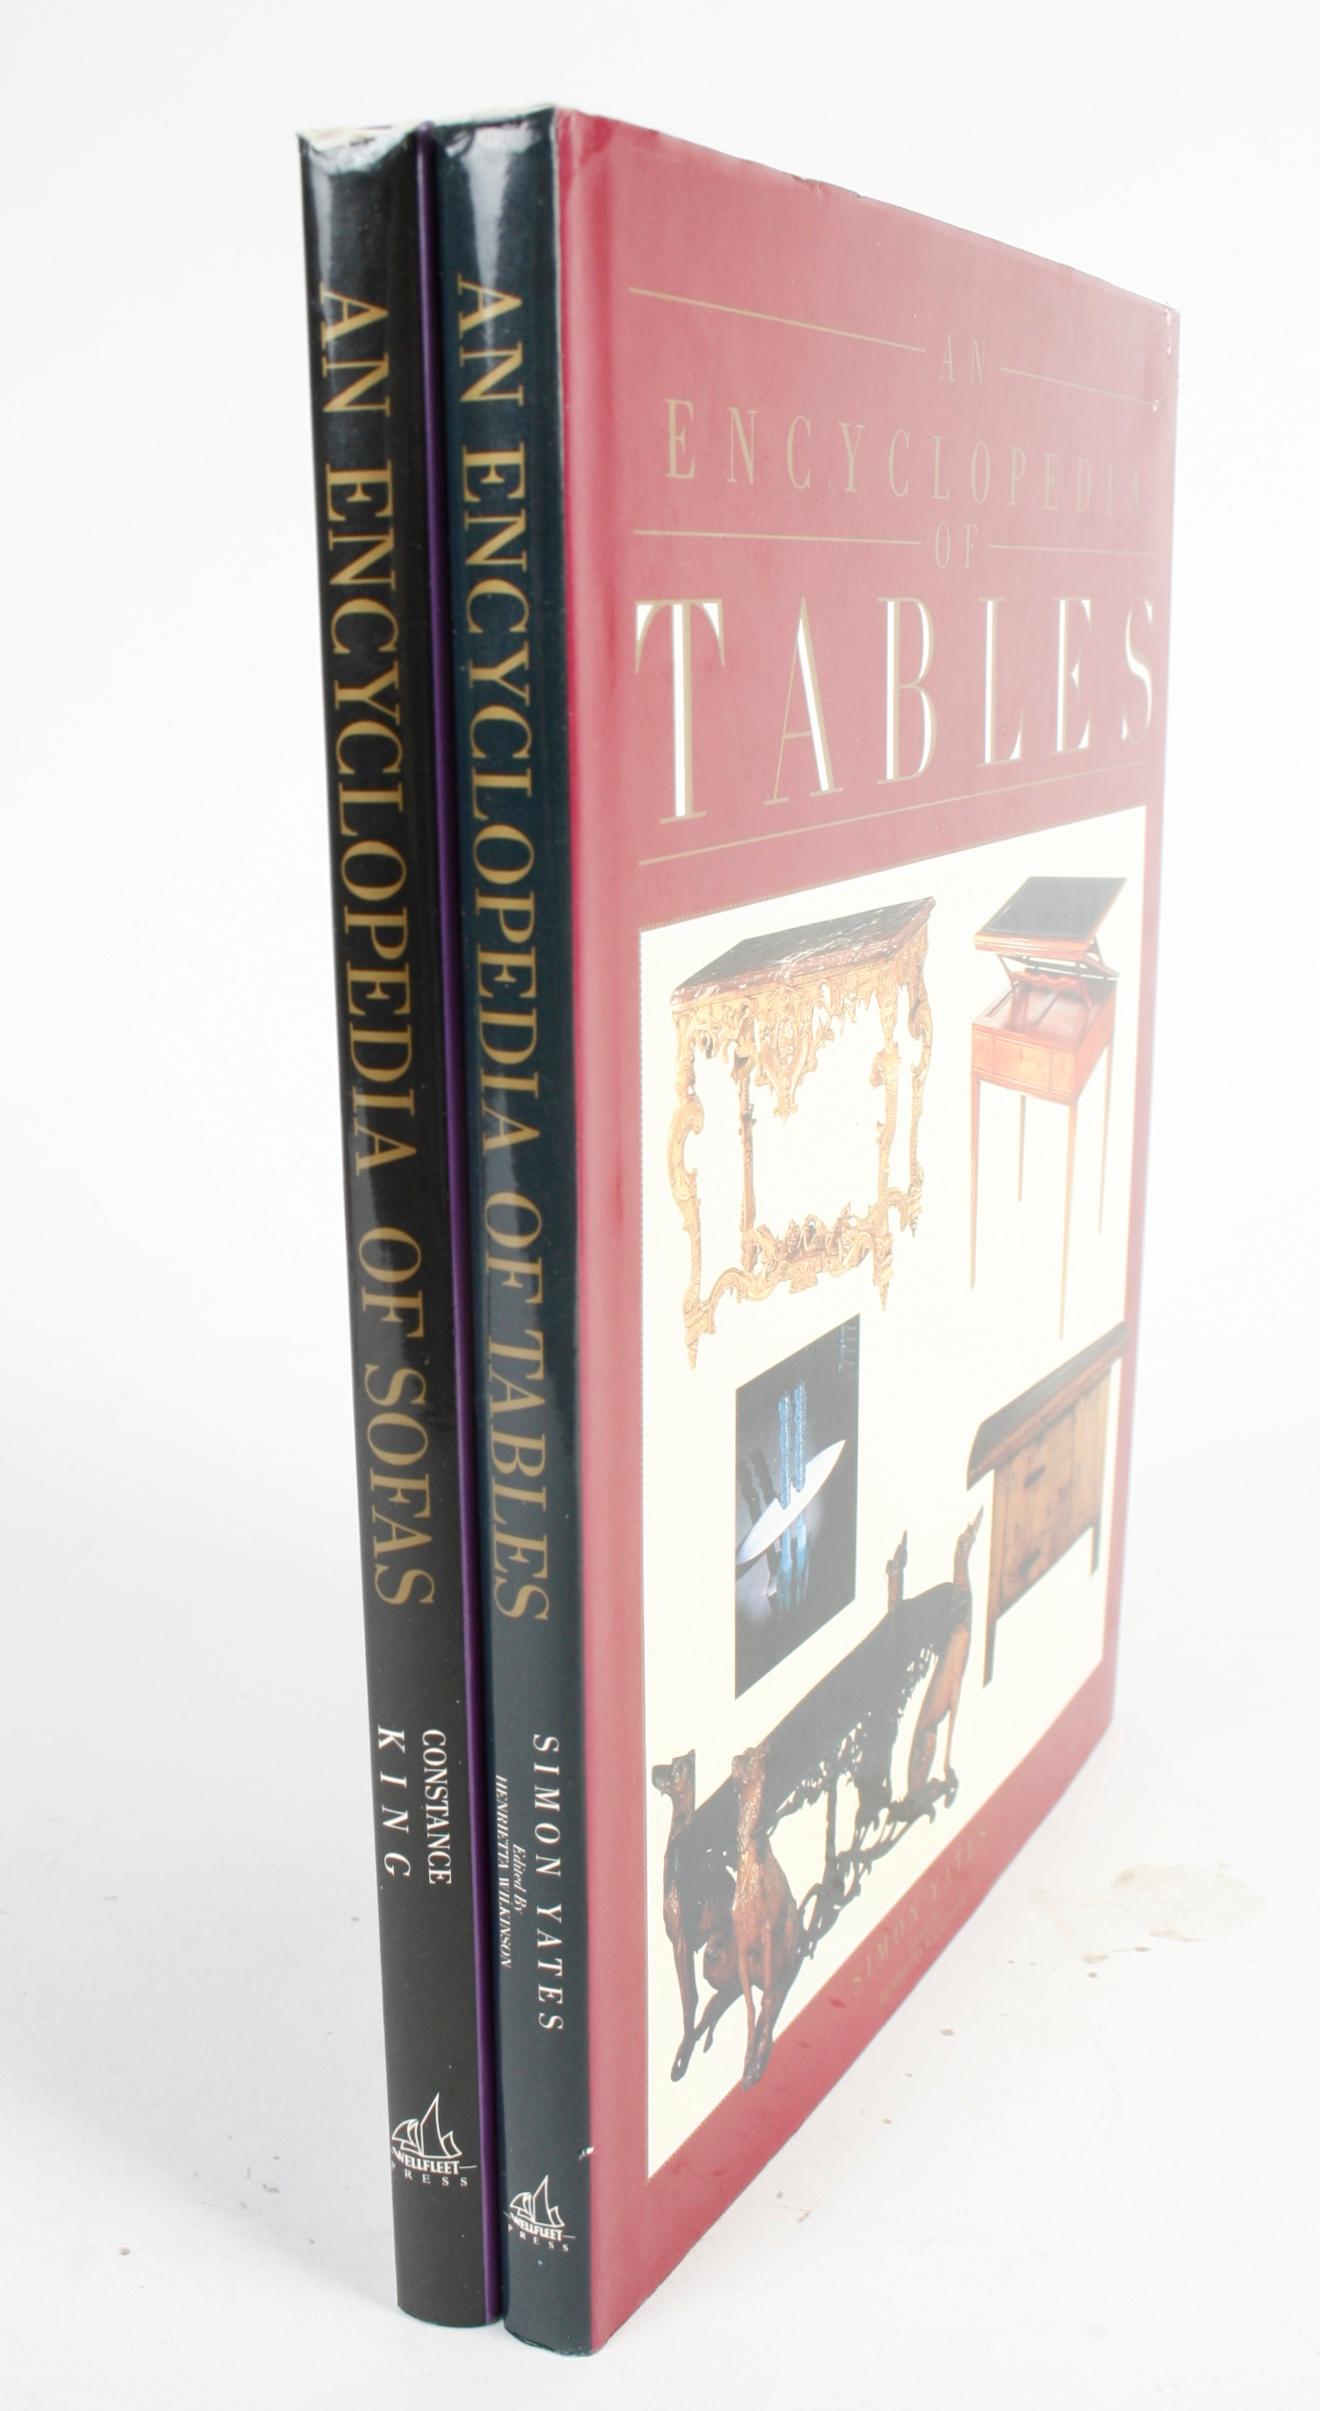 Pair of Encyclopedias: Tables by Simon Yates and Sofas by Constance King. The Wellfleet Press, London, 1989. First edition hardcovers with dust jackets. A pair of great historical references. Covering: Sofas 1700-present, Tables 1600 - present.
NPT